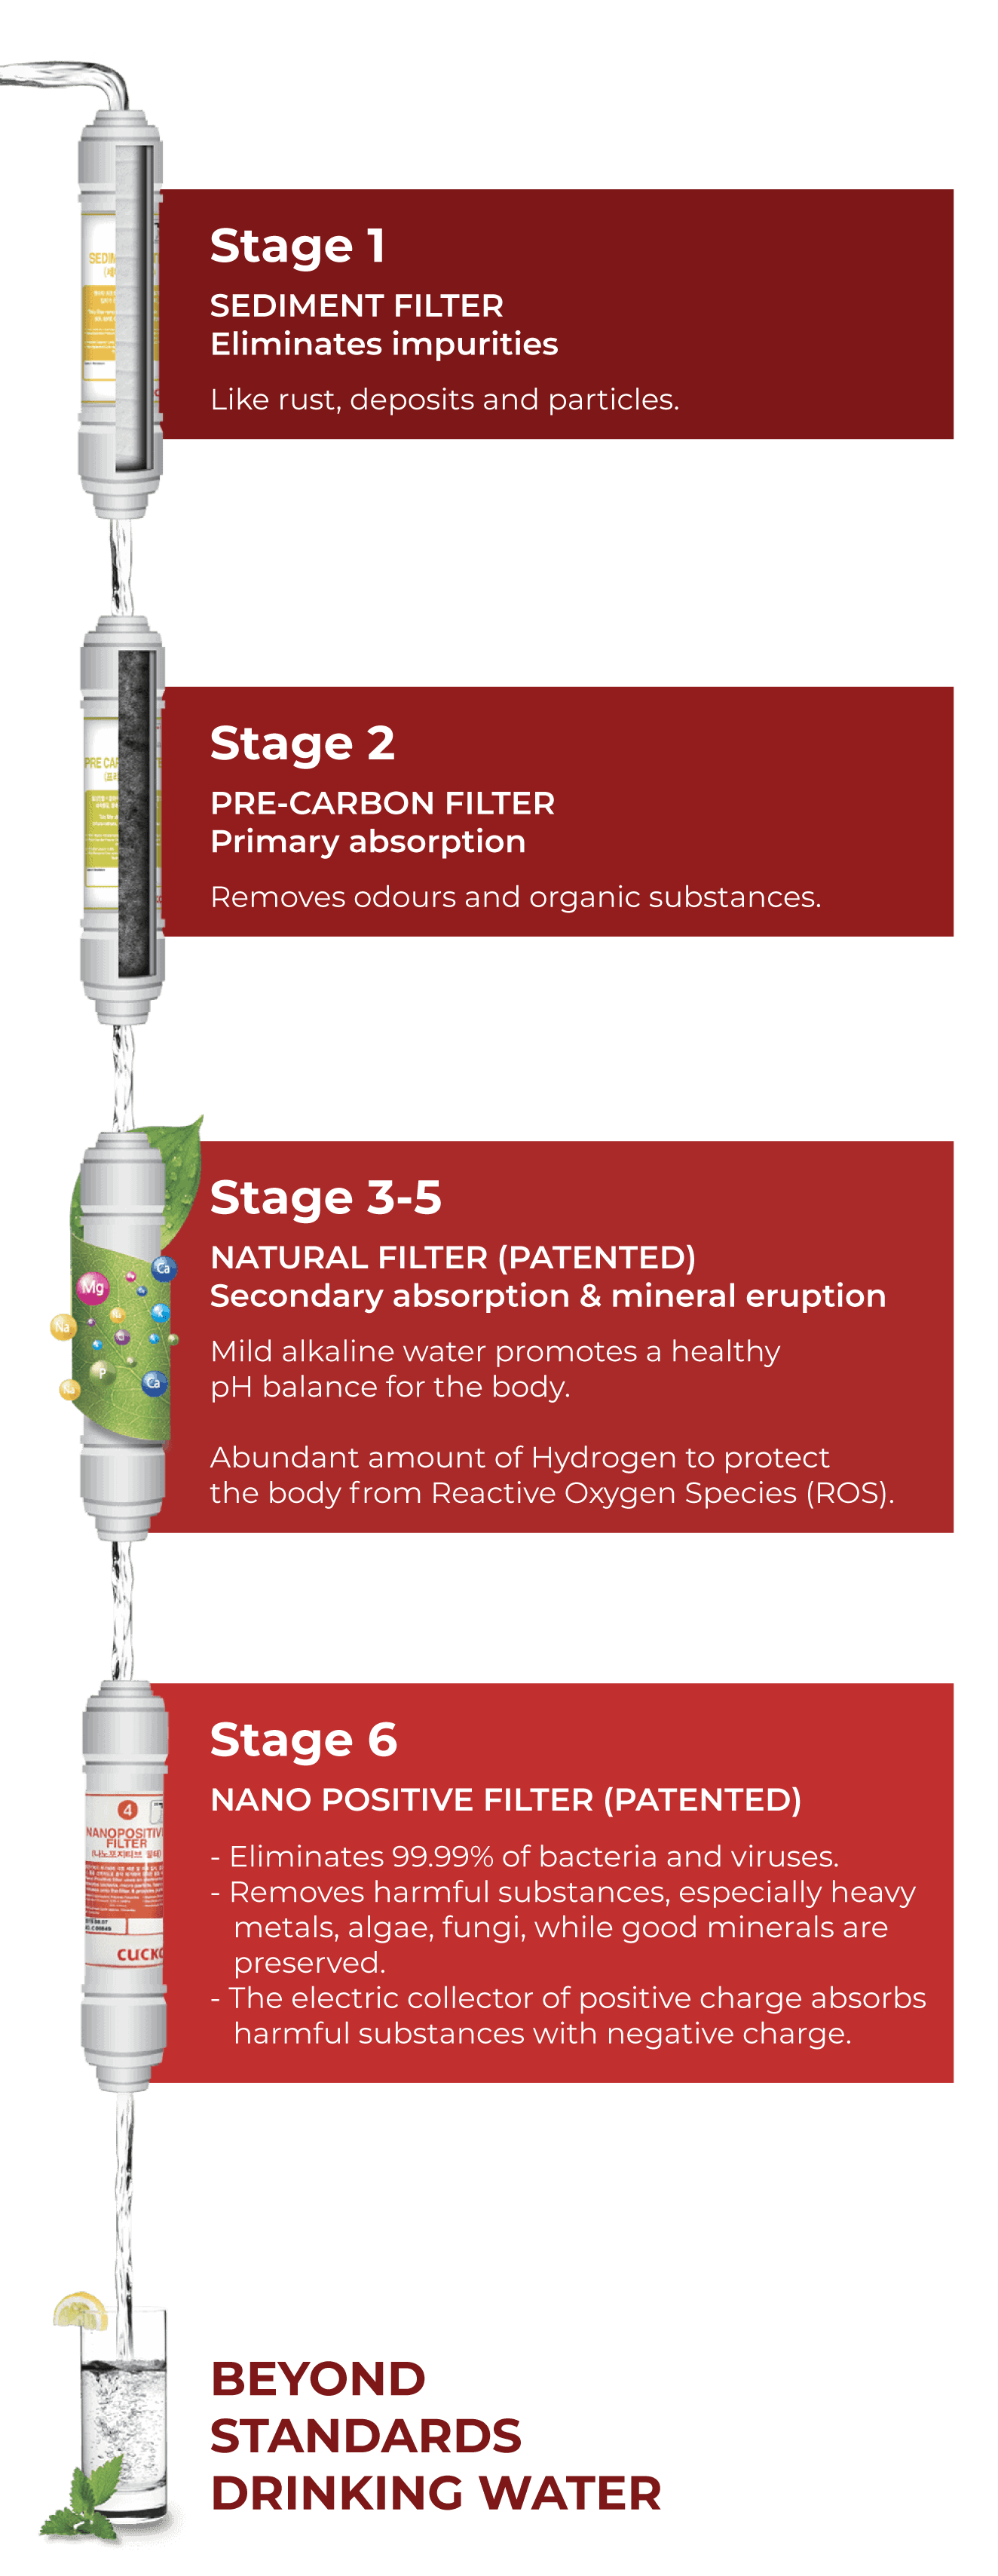 cuckoo-filtration-stages